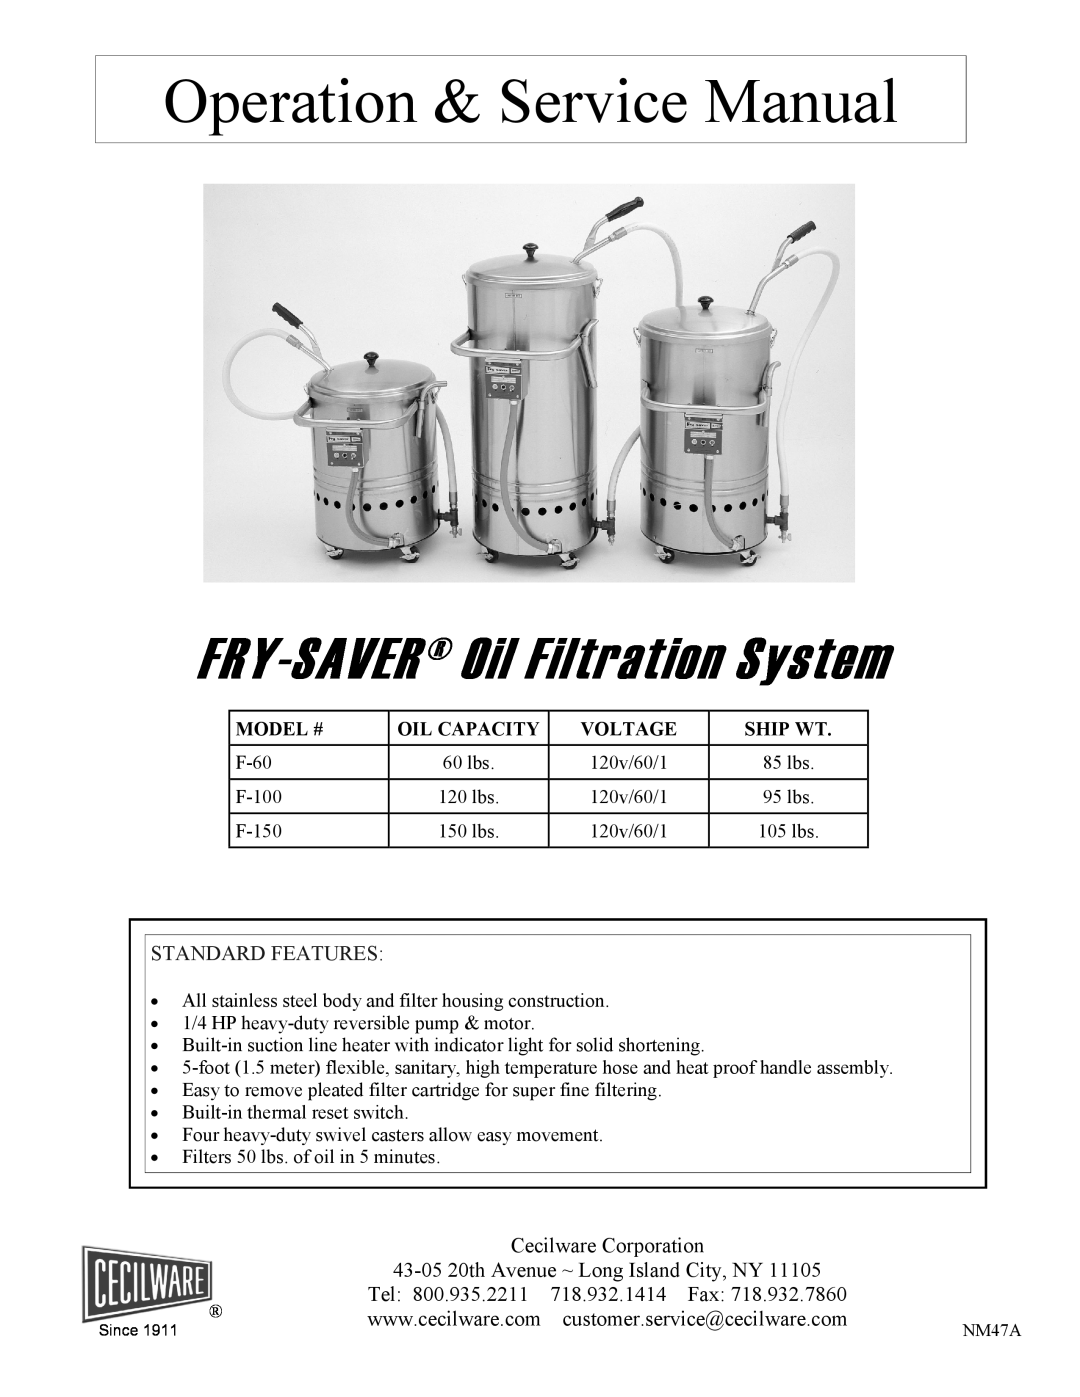 Cecilware F-100 service manual FRY-SAVEROil Filtration System, Standard Features, Model #, Oil Capacity, Voltage, Ship Wt 